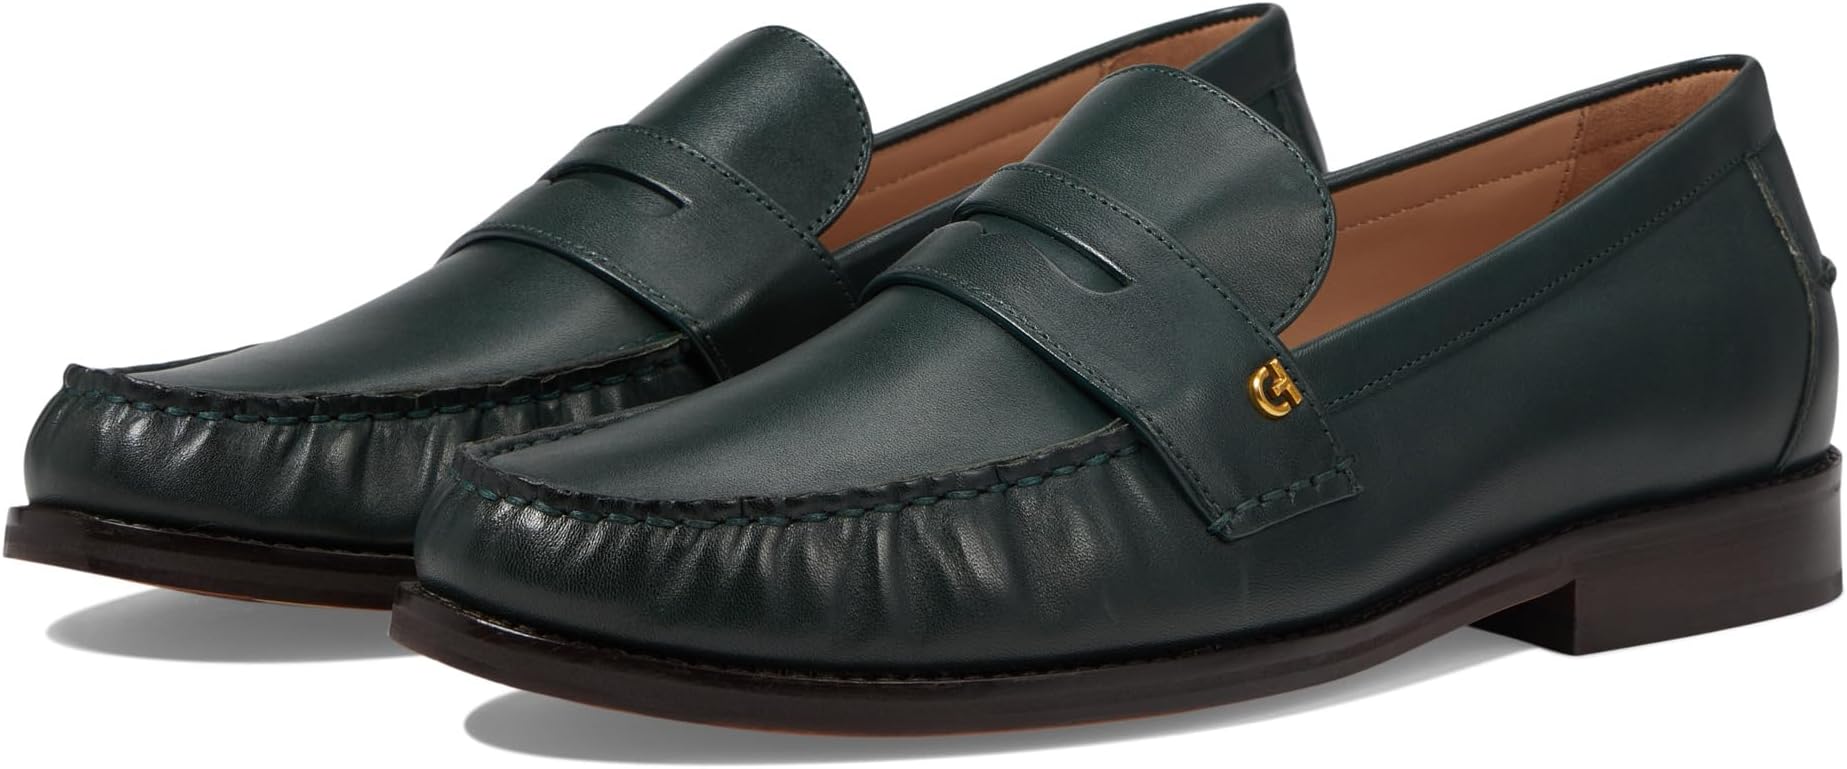 Лоферы Lux Pinch Penny Loafer Cole Haan, цвет Scarab Leather